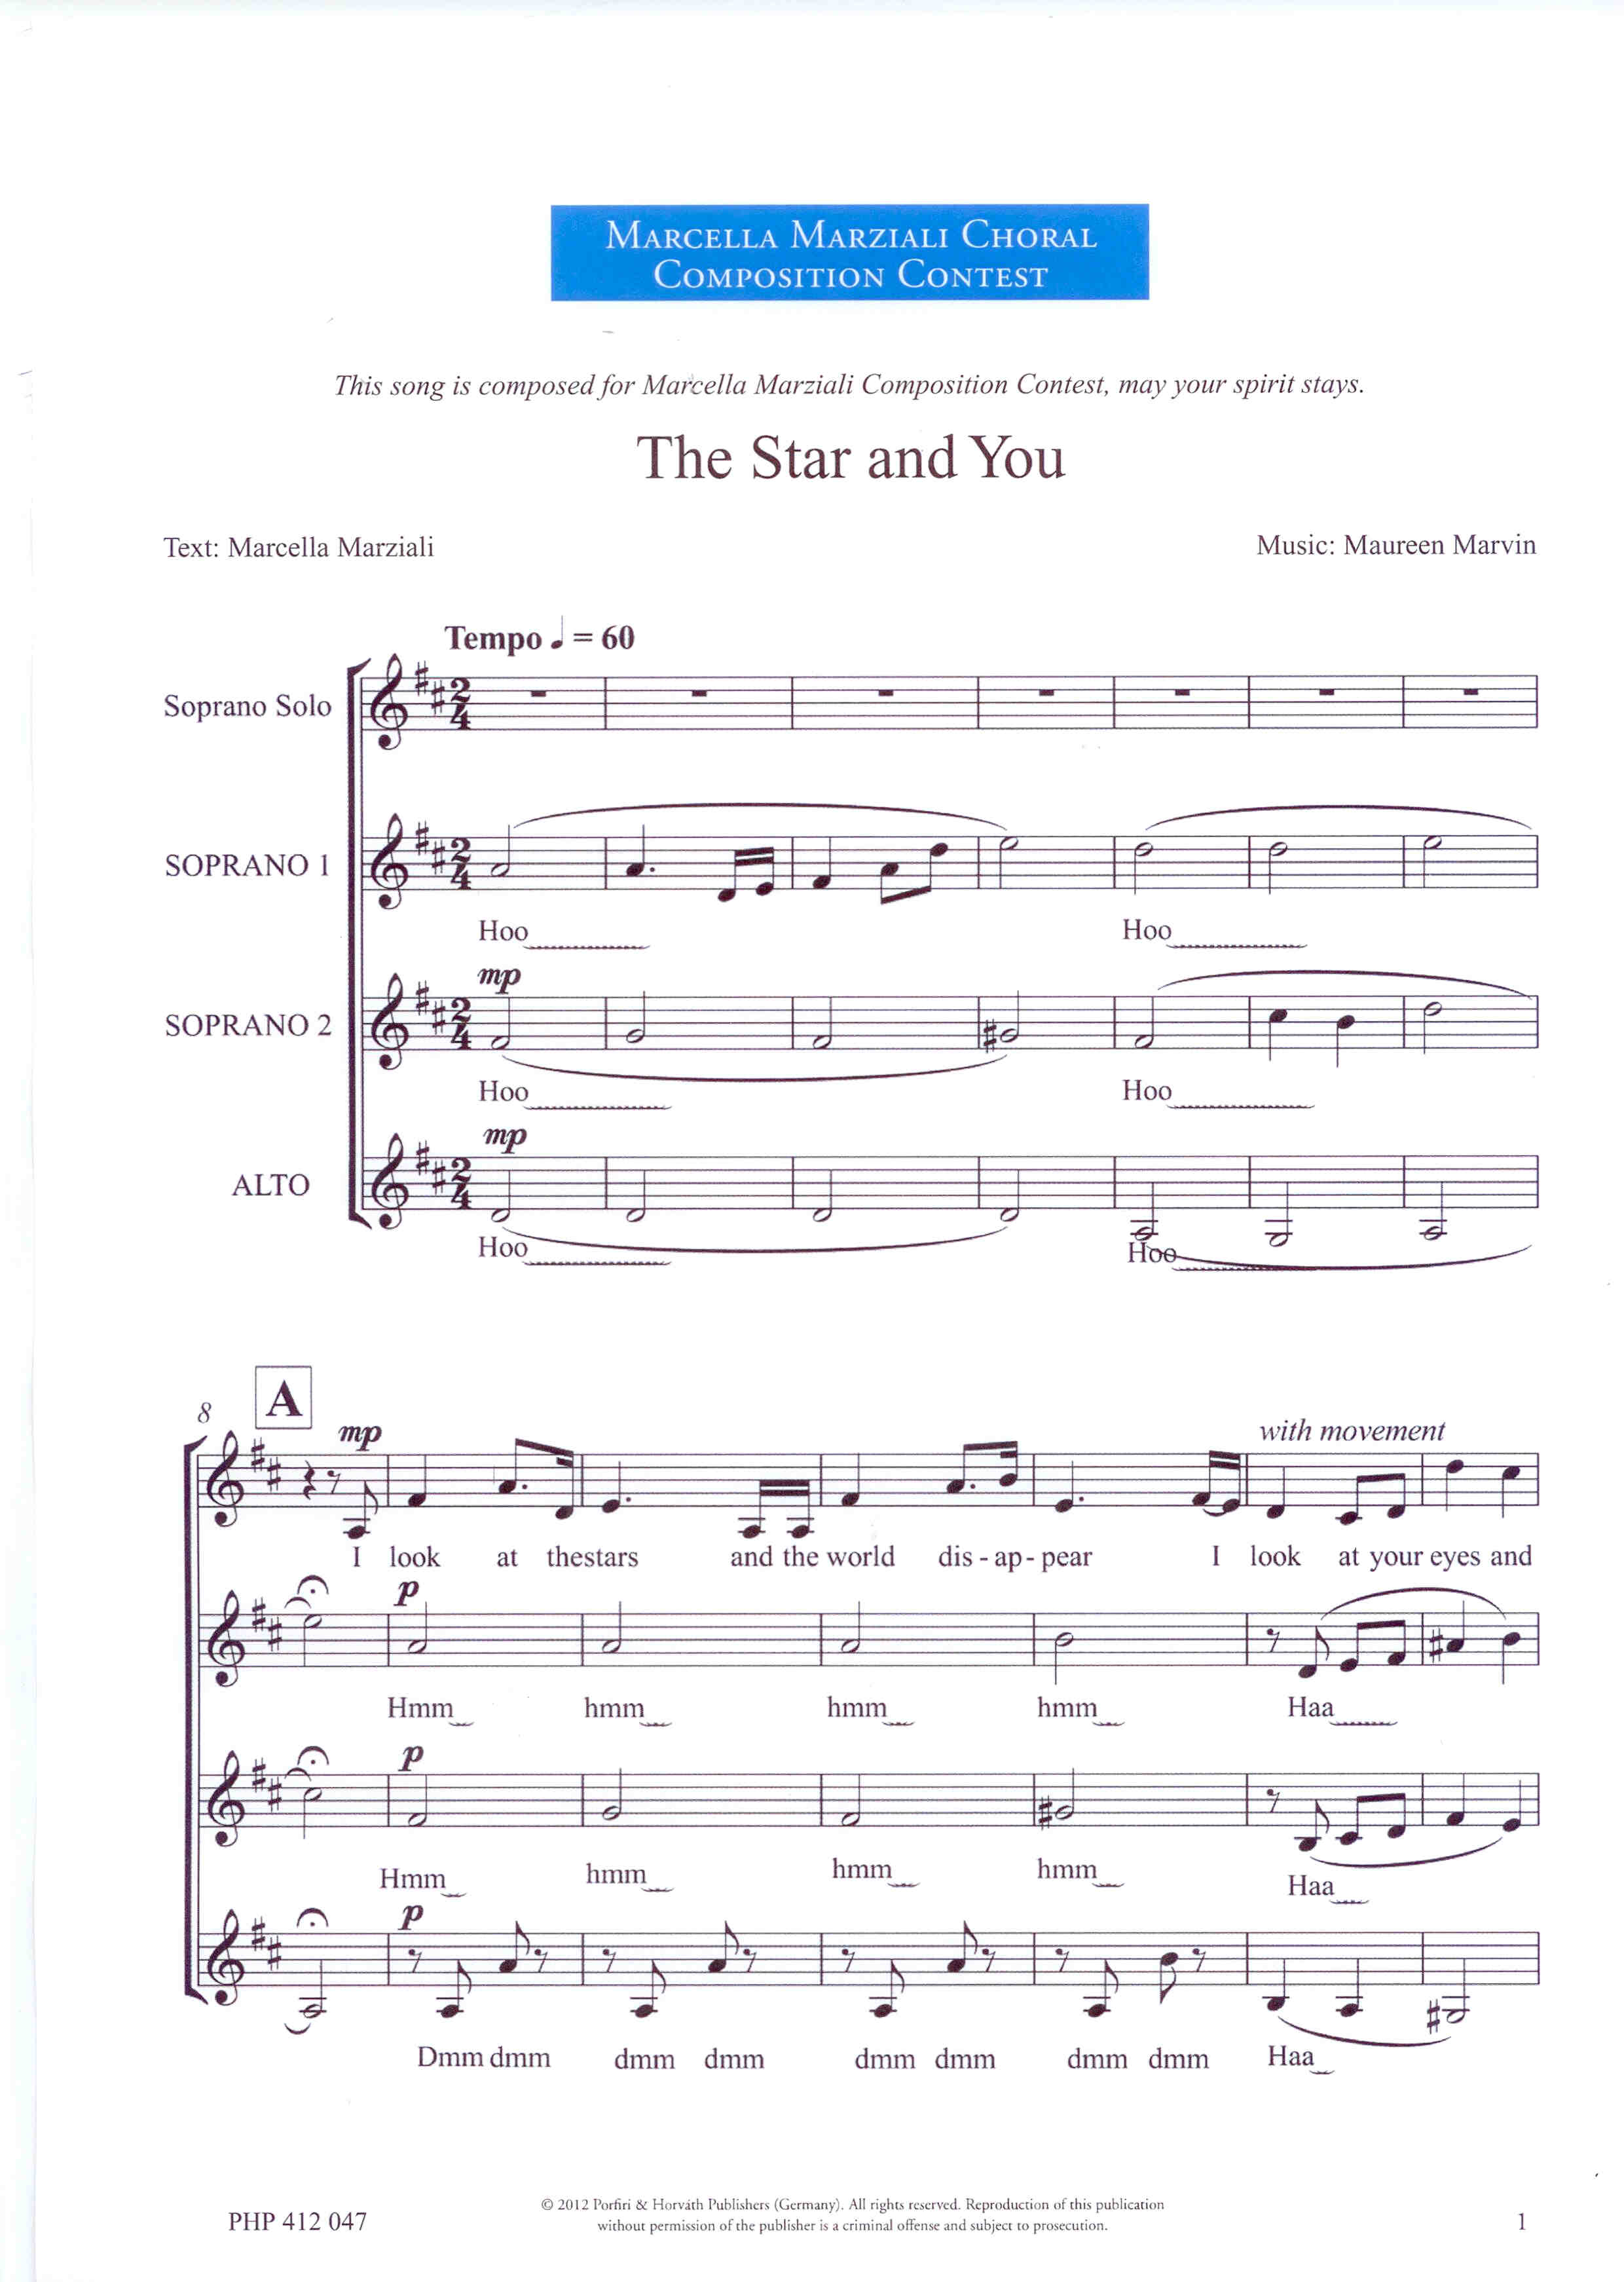 The Star and You - Show sample score